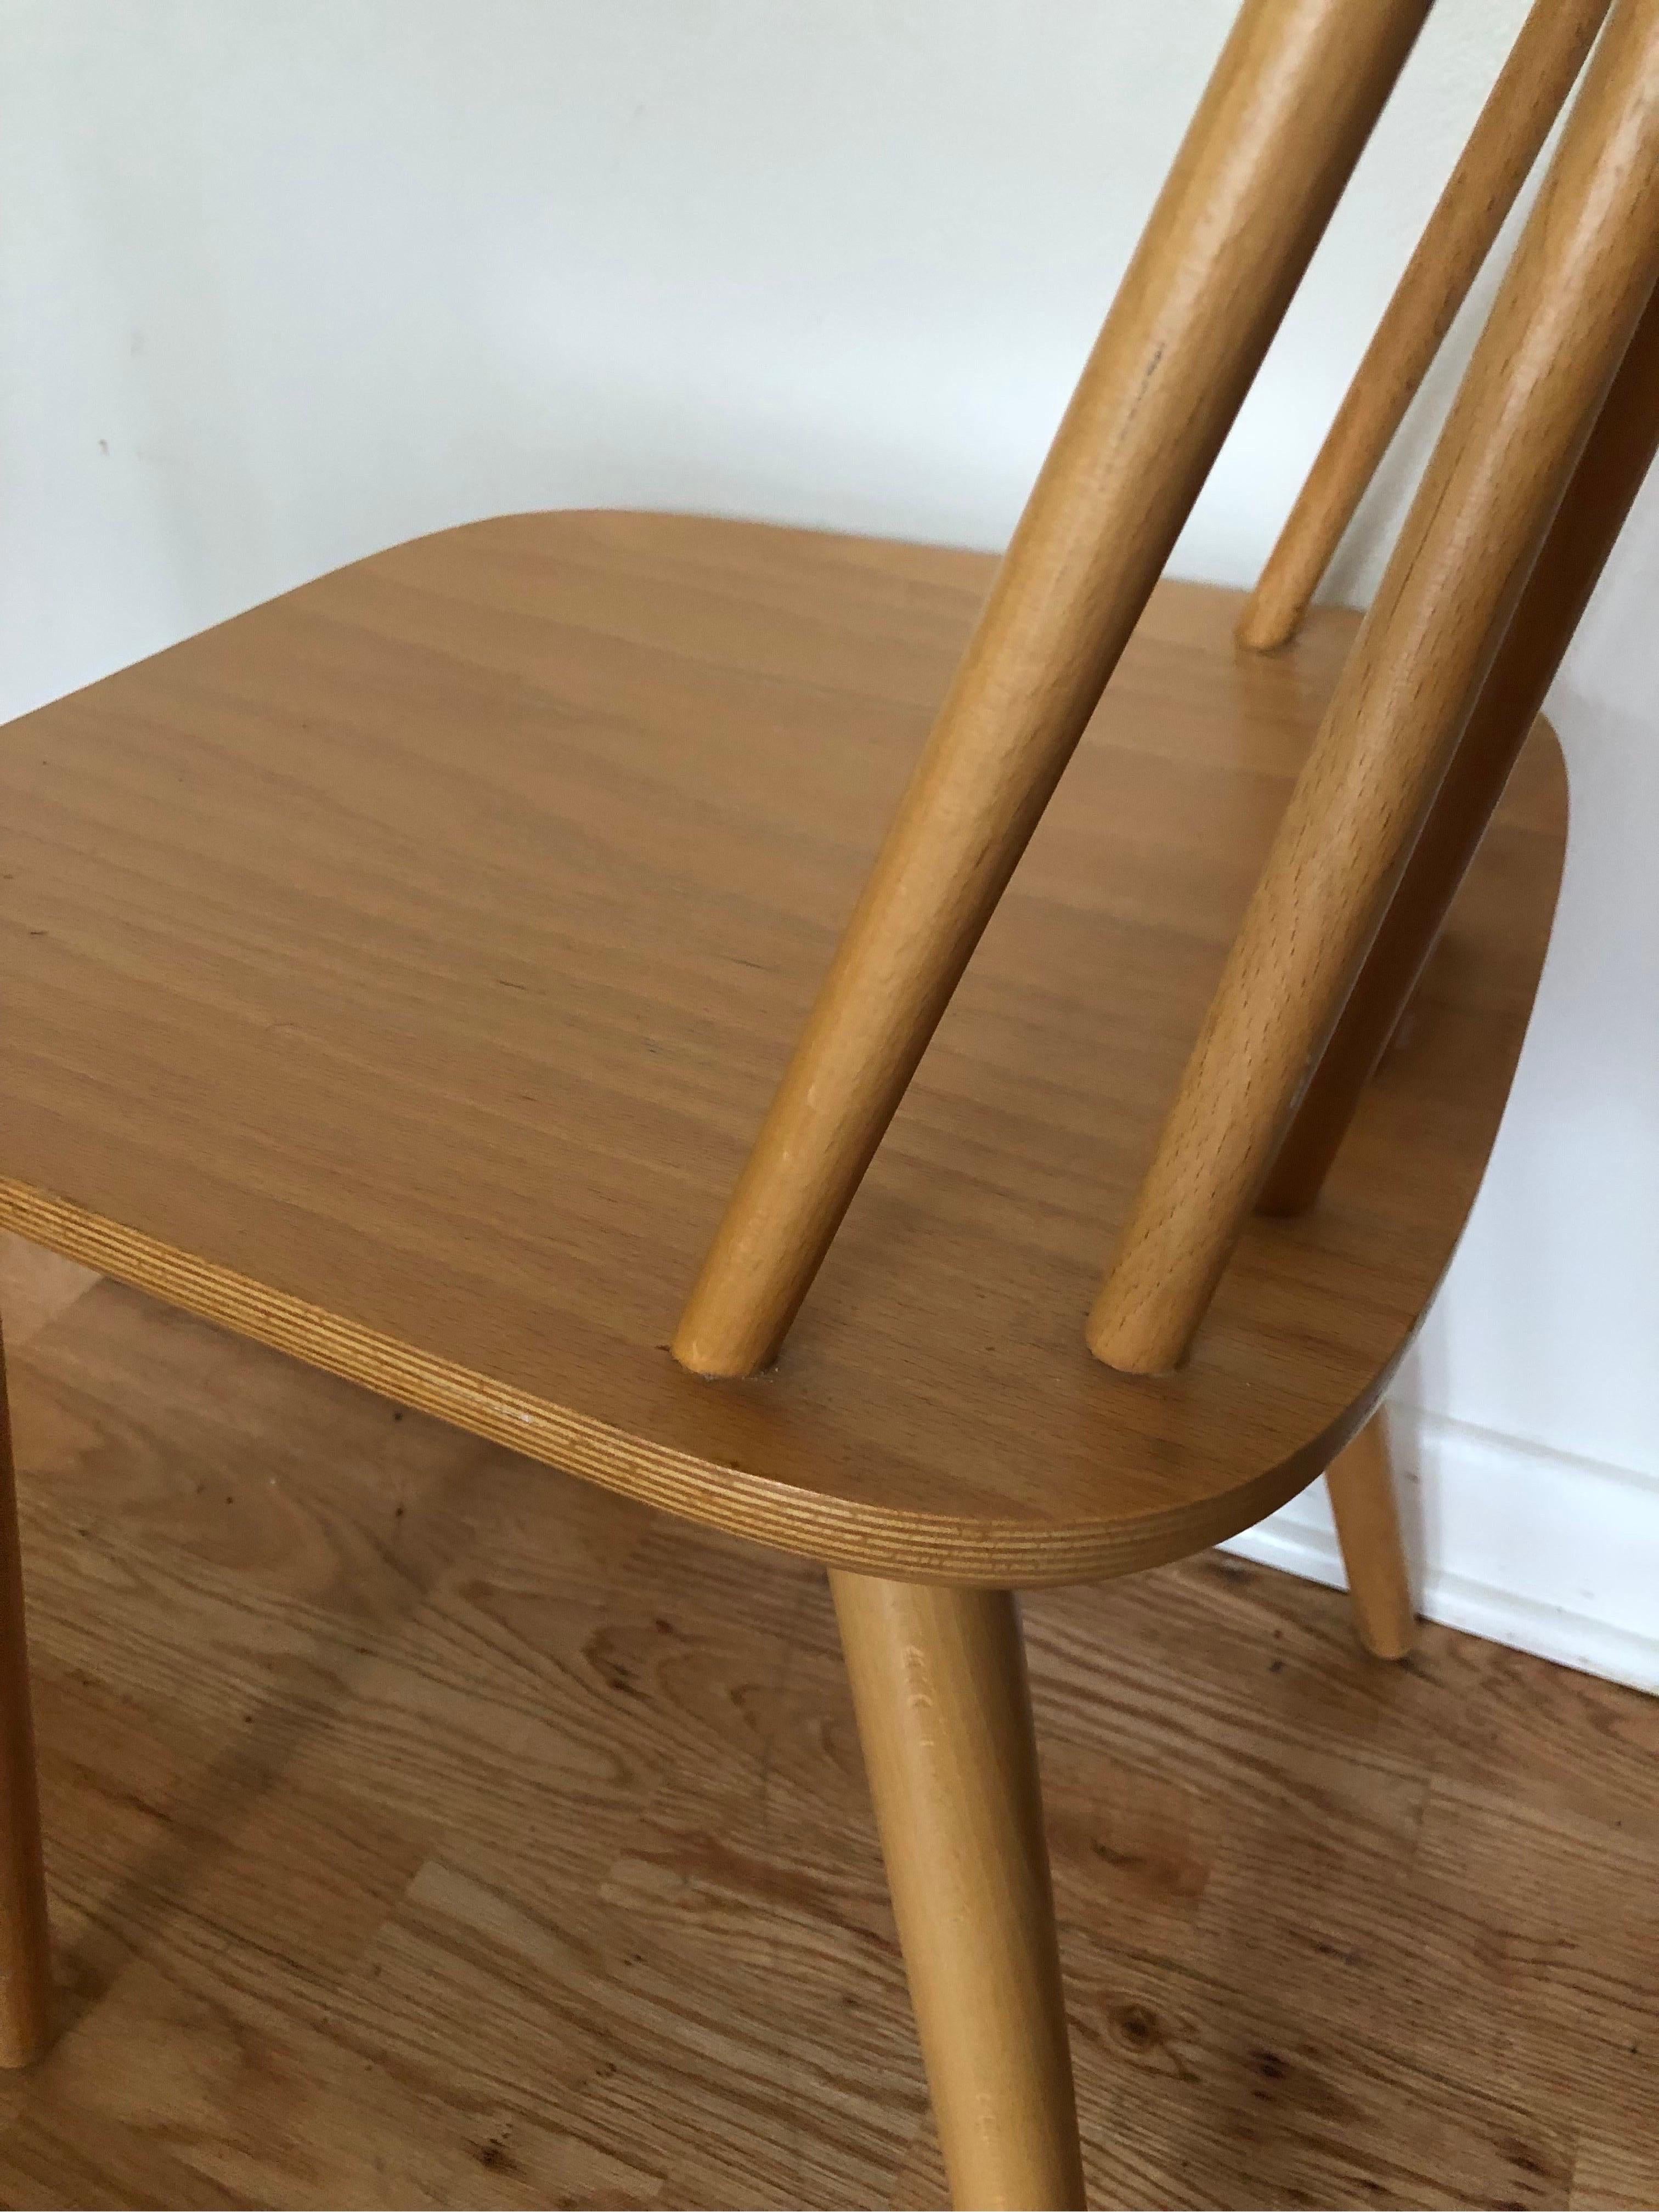 Vintage Mid Century Modern Chair Made in by Poland Radomsko In Good Condition For Sale In Seattle, WA